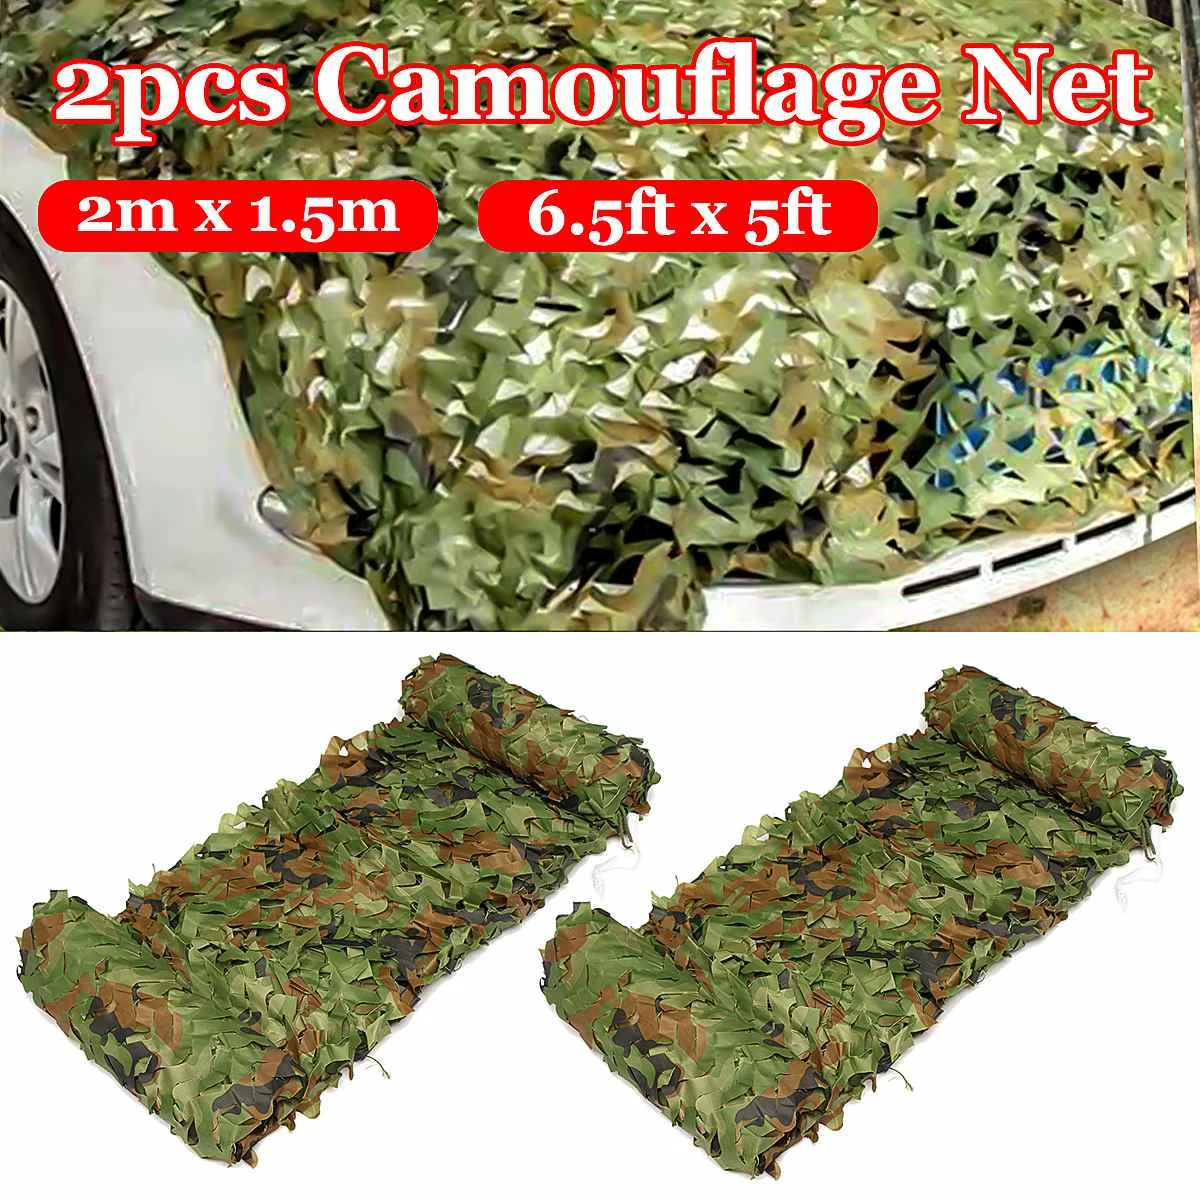 

Woodland Camo Netting Camouflage Net Privacy Protection Mesh Car Covers Army Jungle Tent Shade Camping Sun Shelter 2mx1.5m